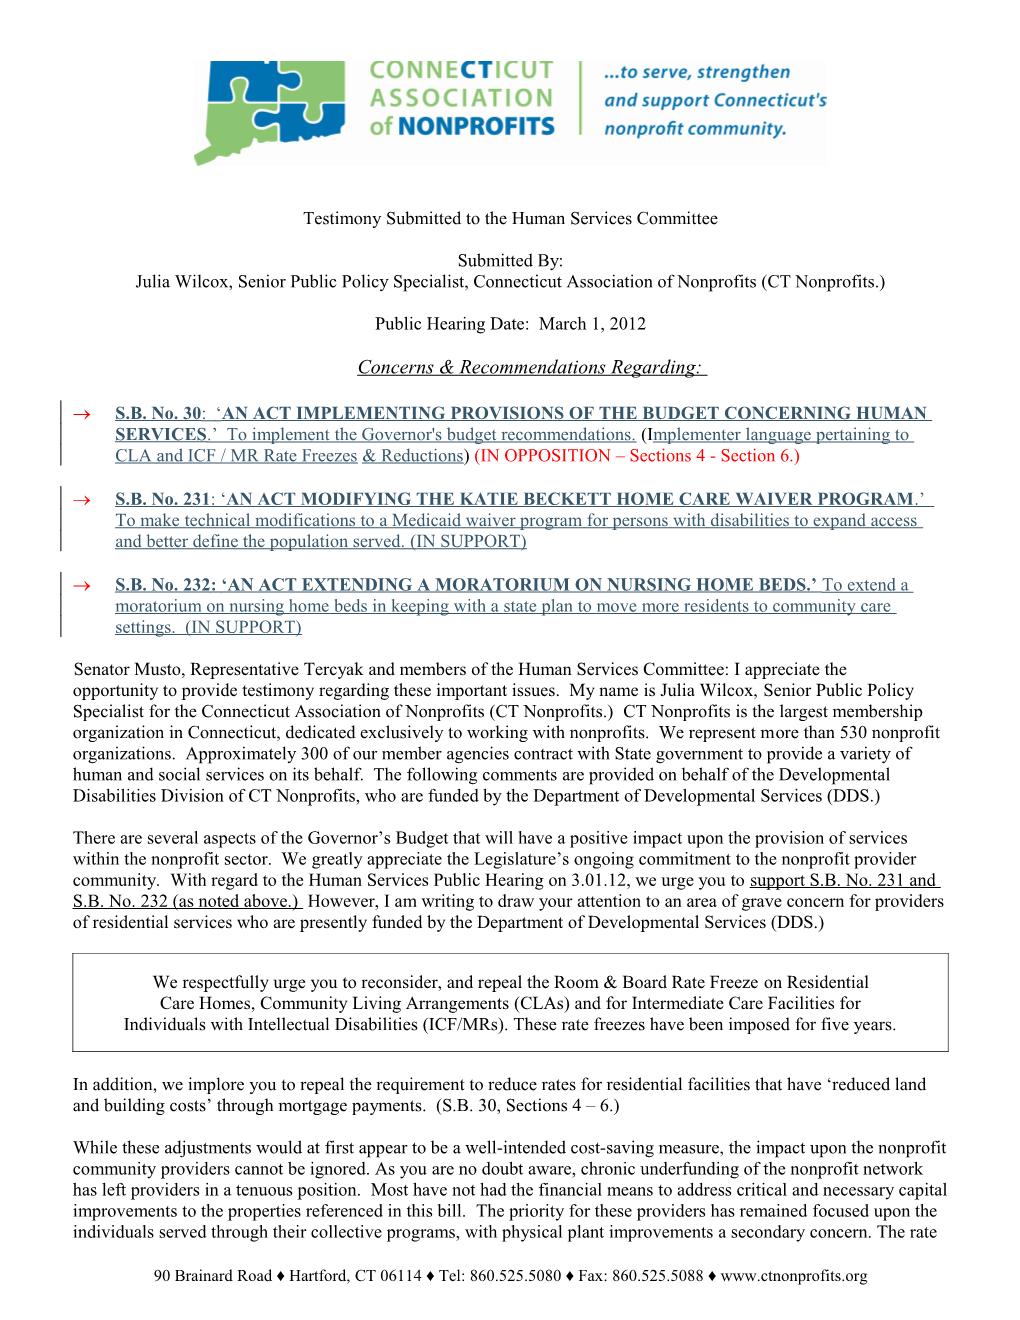 CT Nonprofits Testimony: Human Services, DDS, 3.01.12 J Wilcox Page 2 of 2